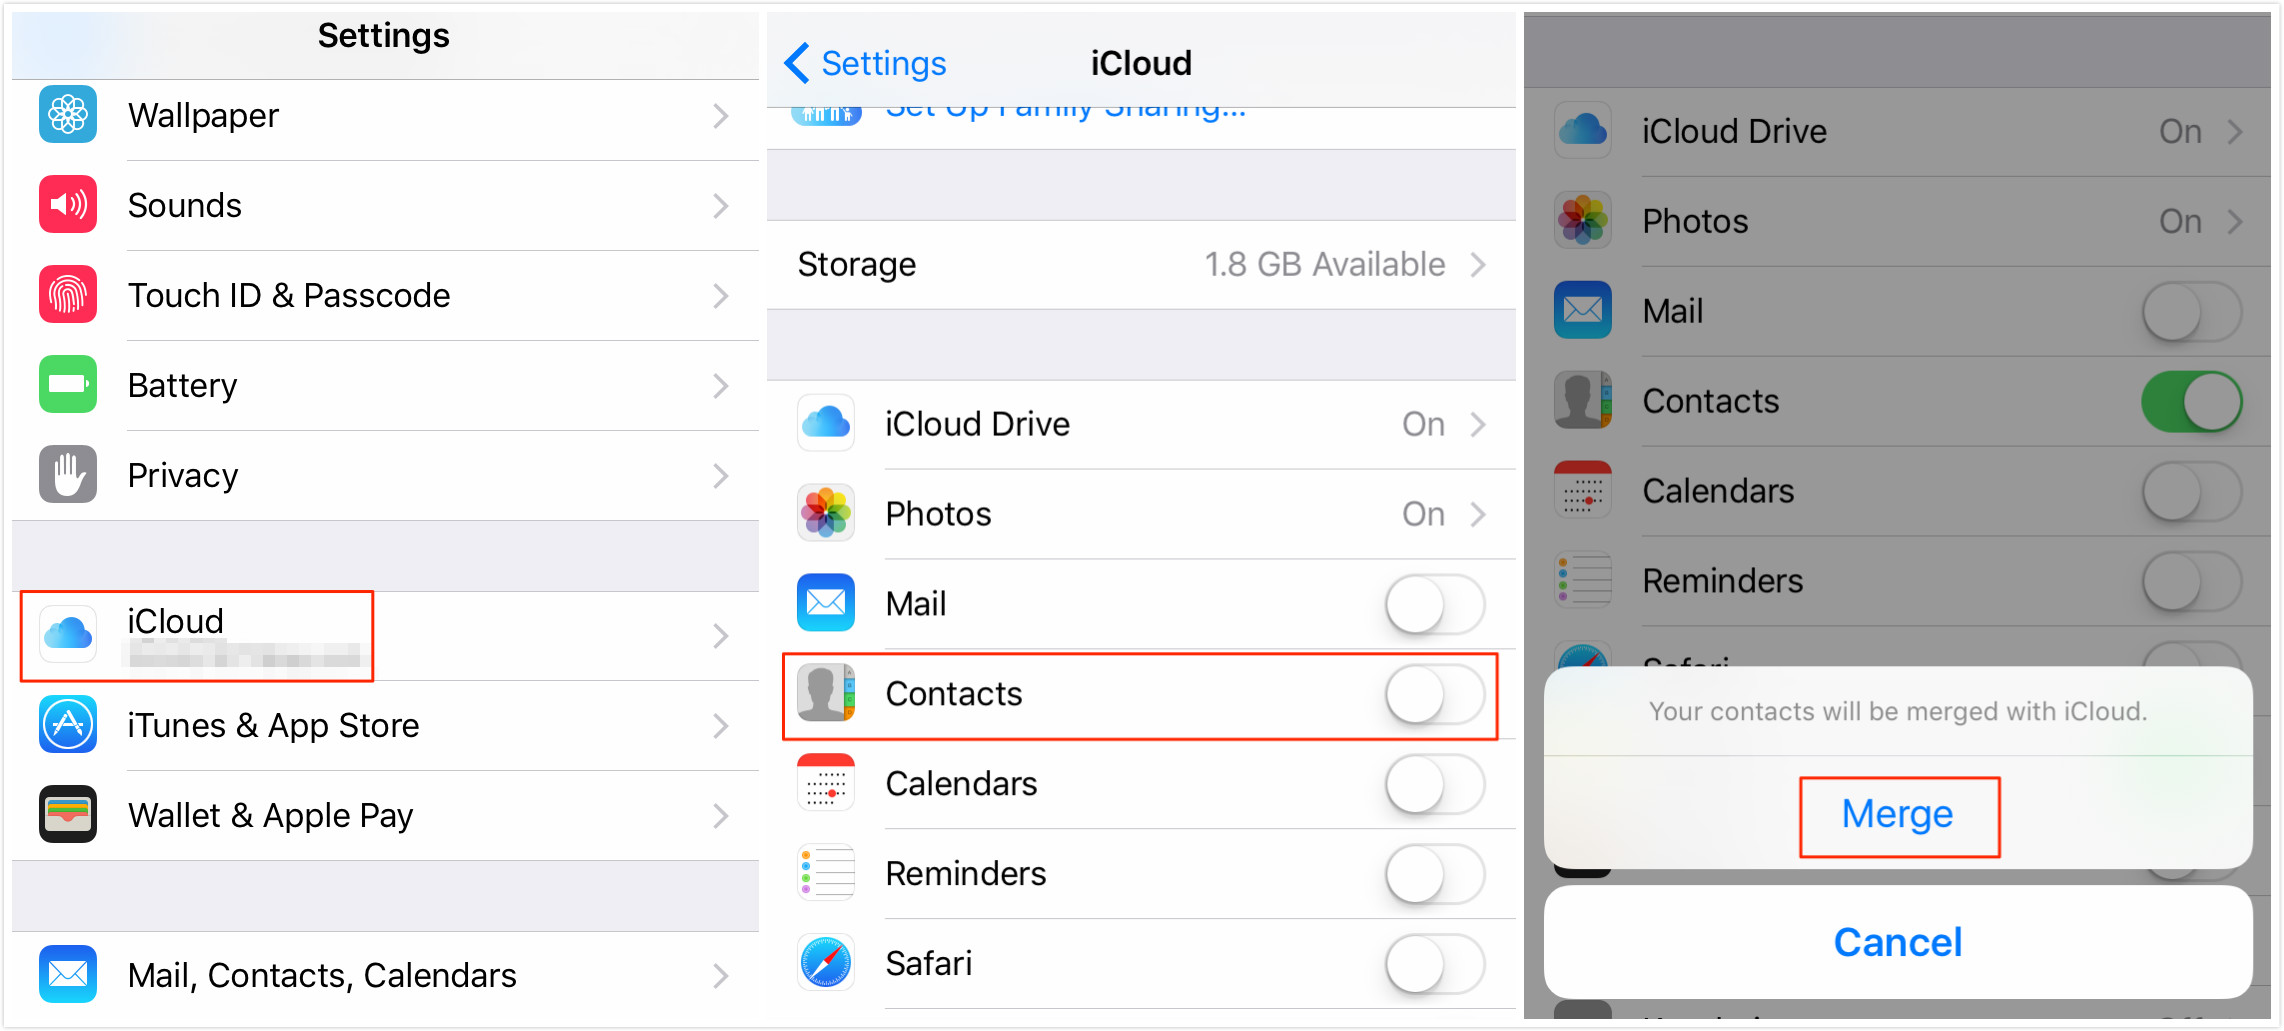 How to Transfer Contacts from iPhone to iPhone via iCloud